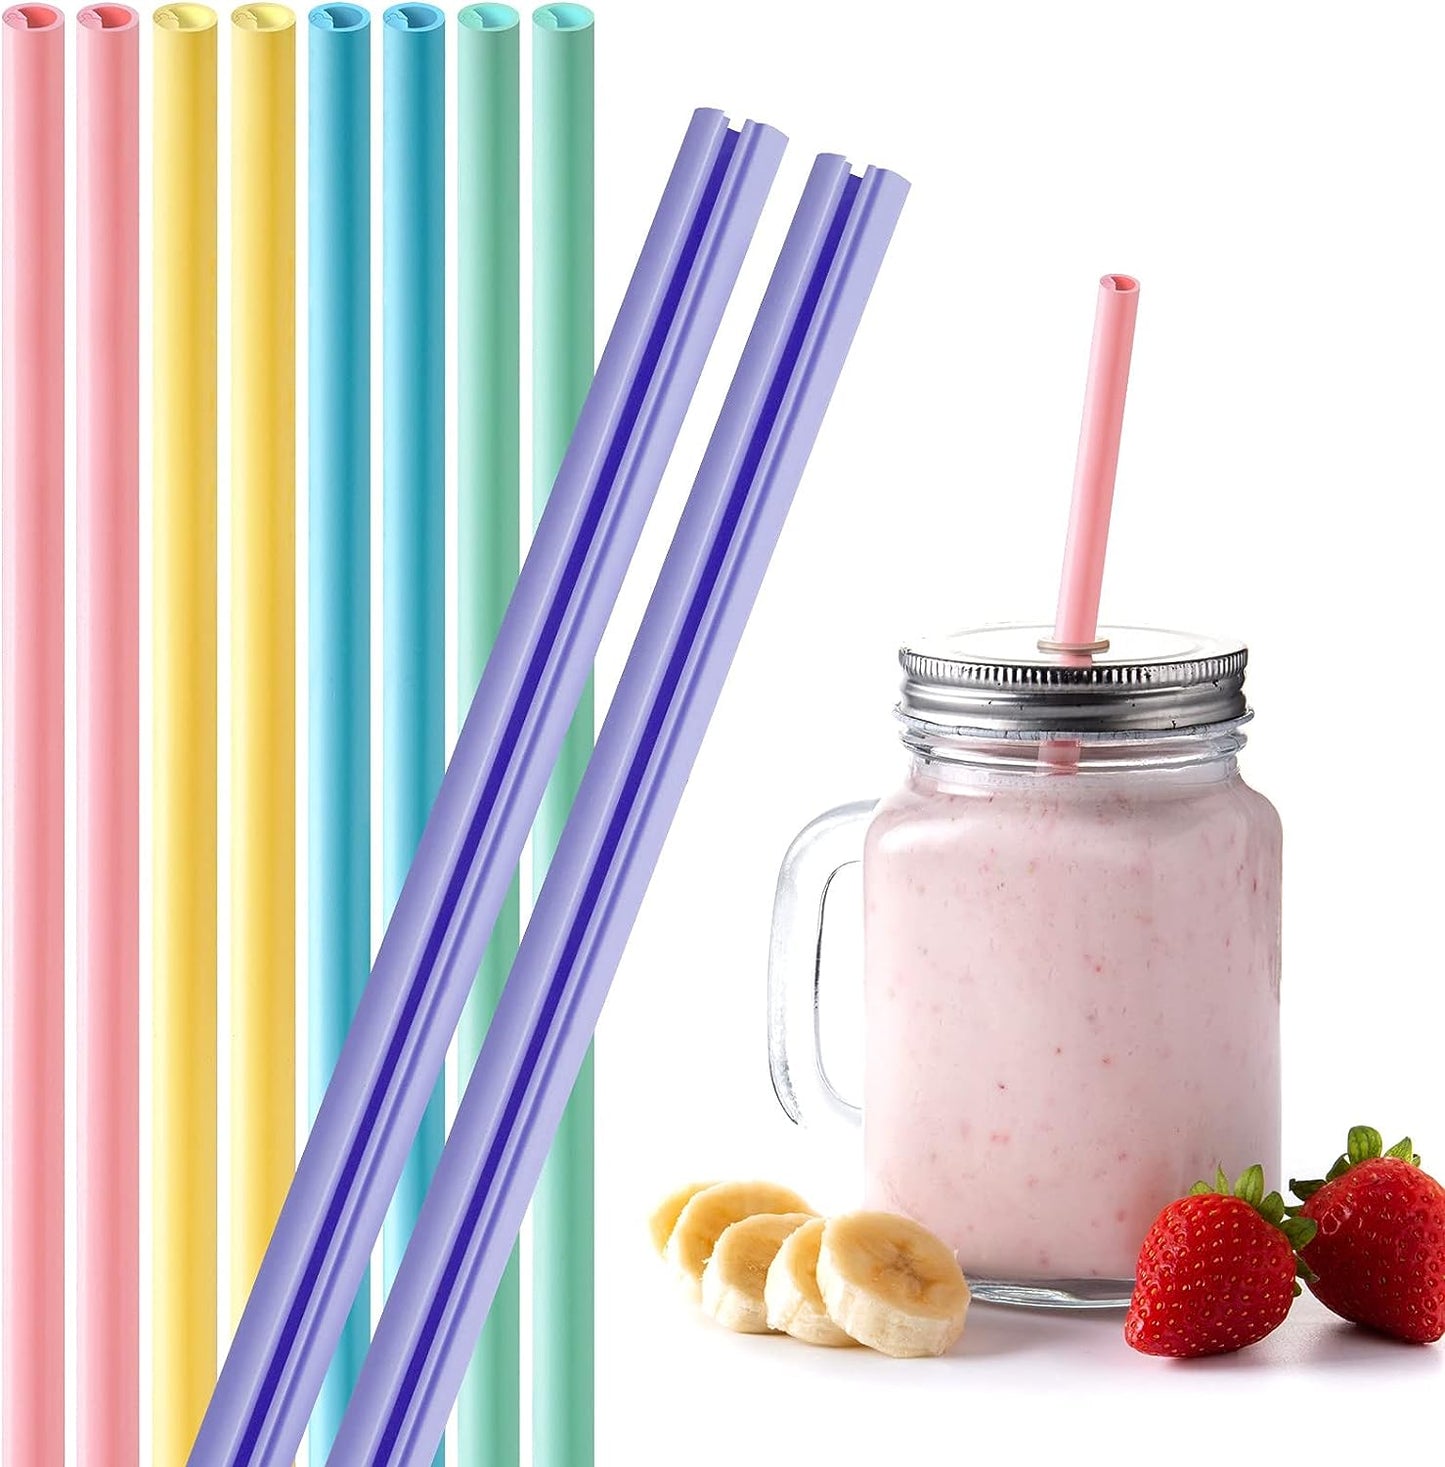 FIRST-RATE  10-Pack Reusable Silicone Straws Openable Design Easy to Clean, Premium Food Grade Snap Straws BPA-Free Hot & Cold Compatible Drinking Straws Flexible Portable No Brush Needed (5 Macron Colors)